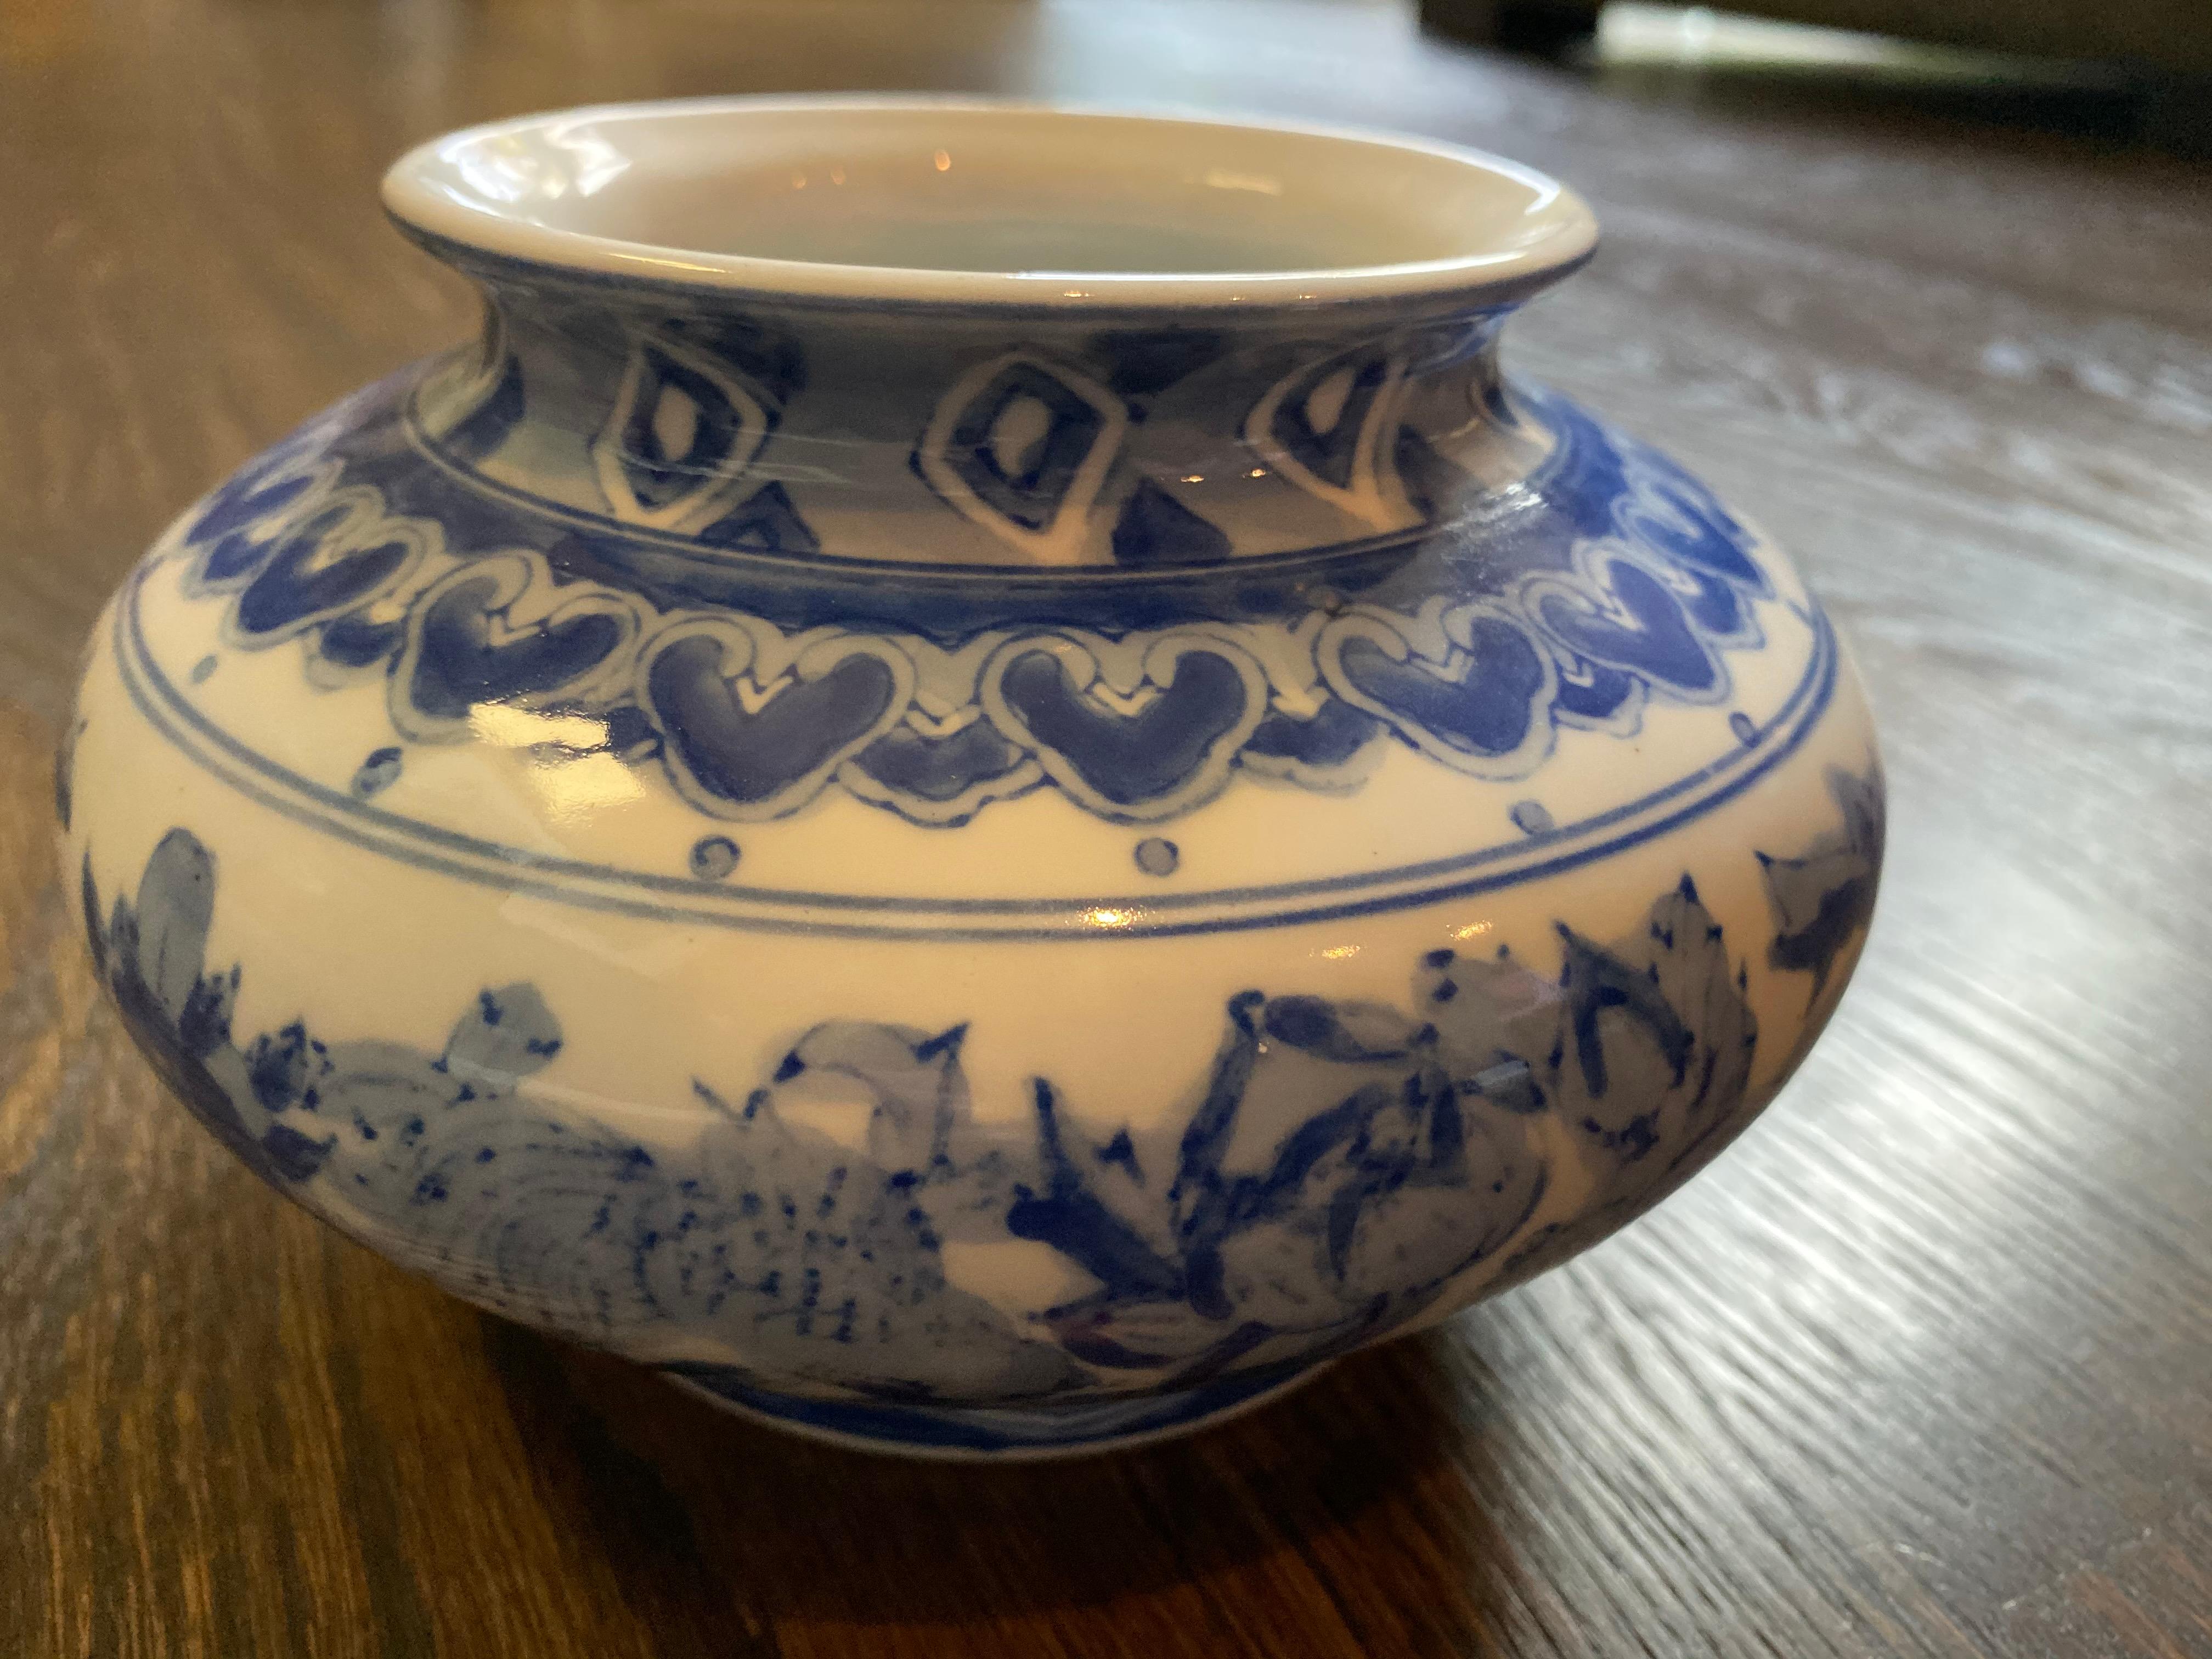 Vintage chinoiserie blue and white vase 

This is a Chinese decorative porcelain vase pot in blue and white color finish. The theme is oriental scenery graphic. It has a round fat body shape with a large mouth opening for flexibility.